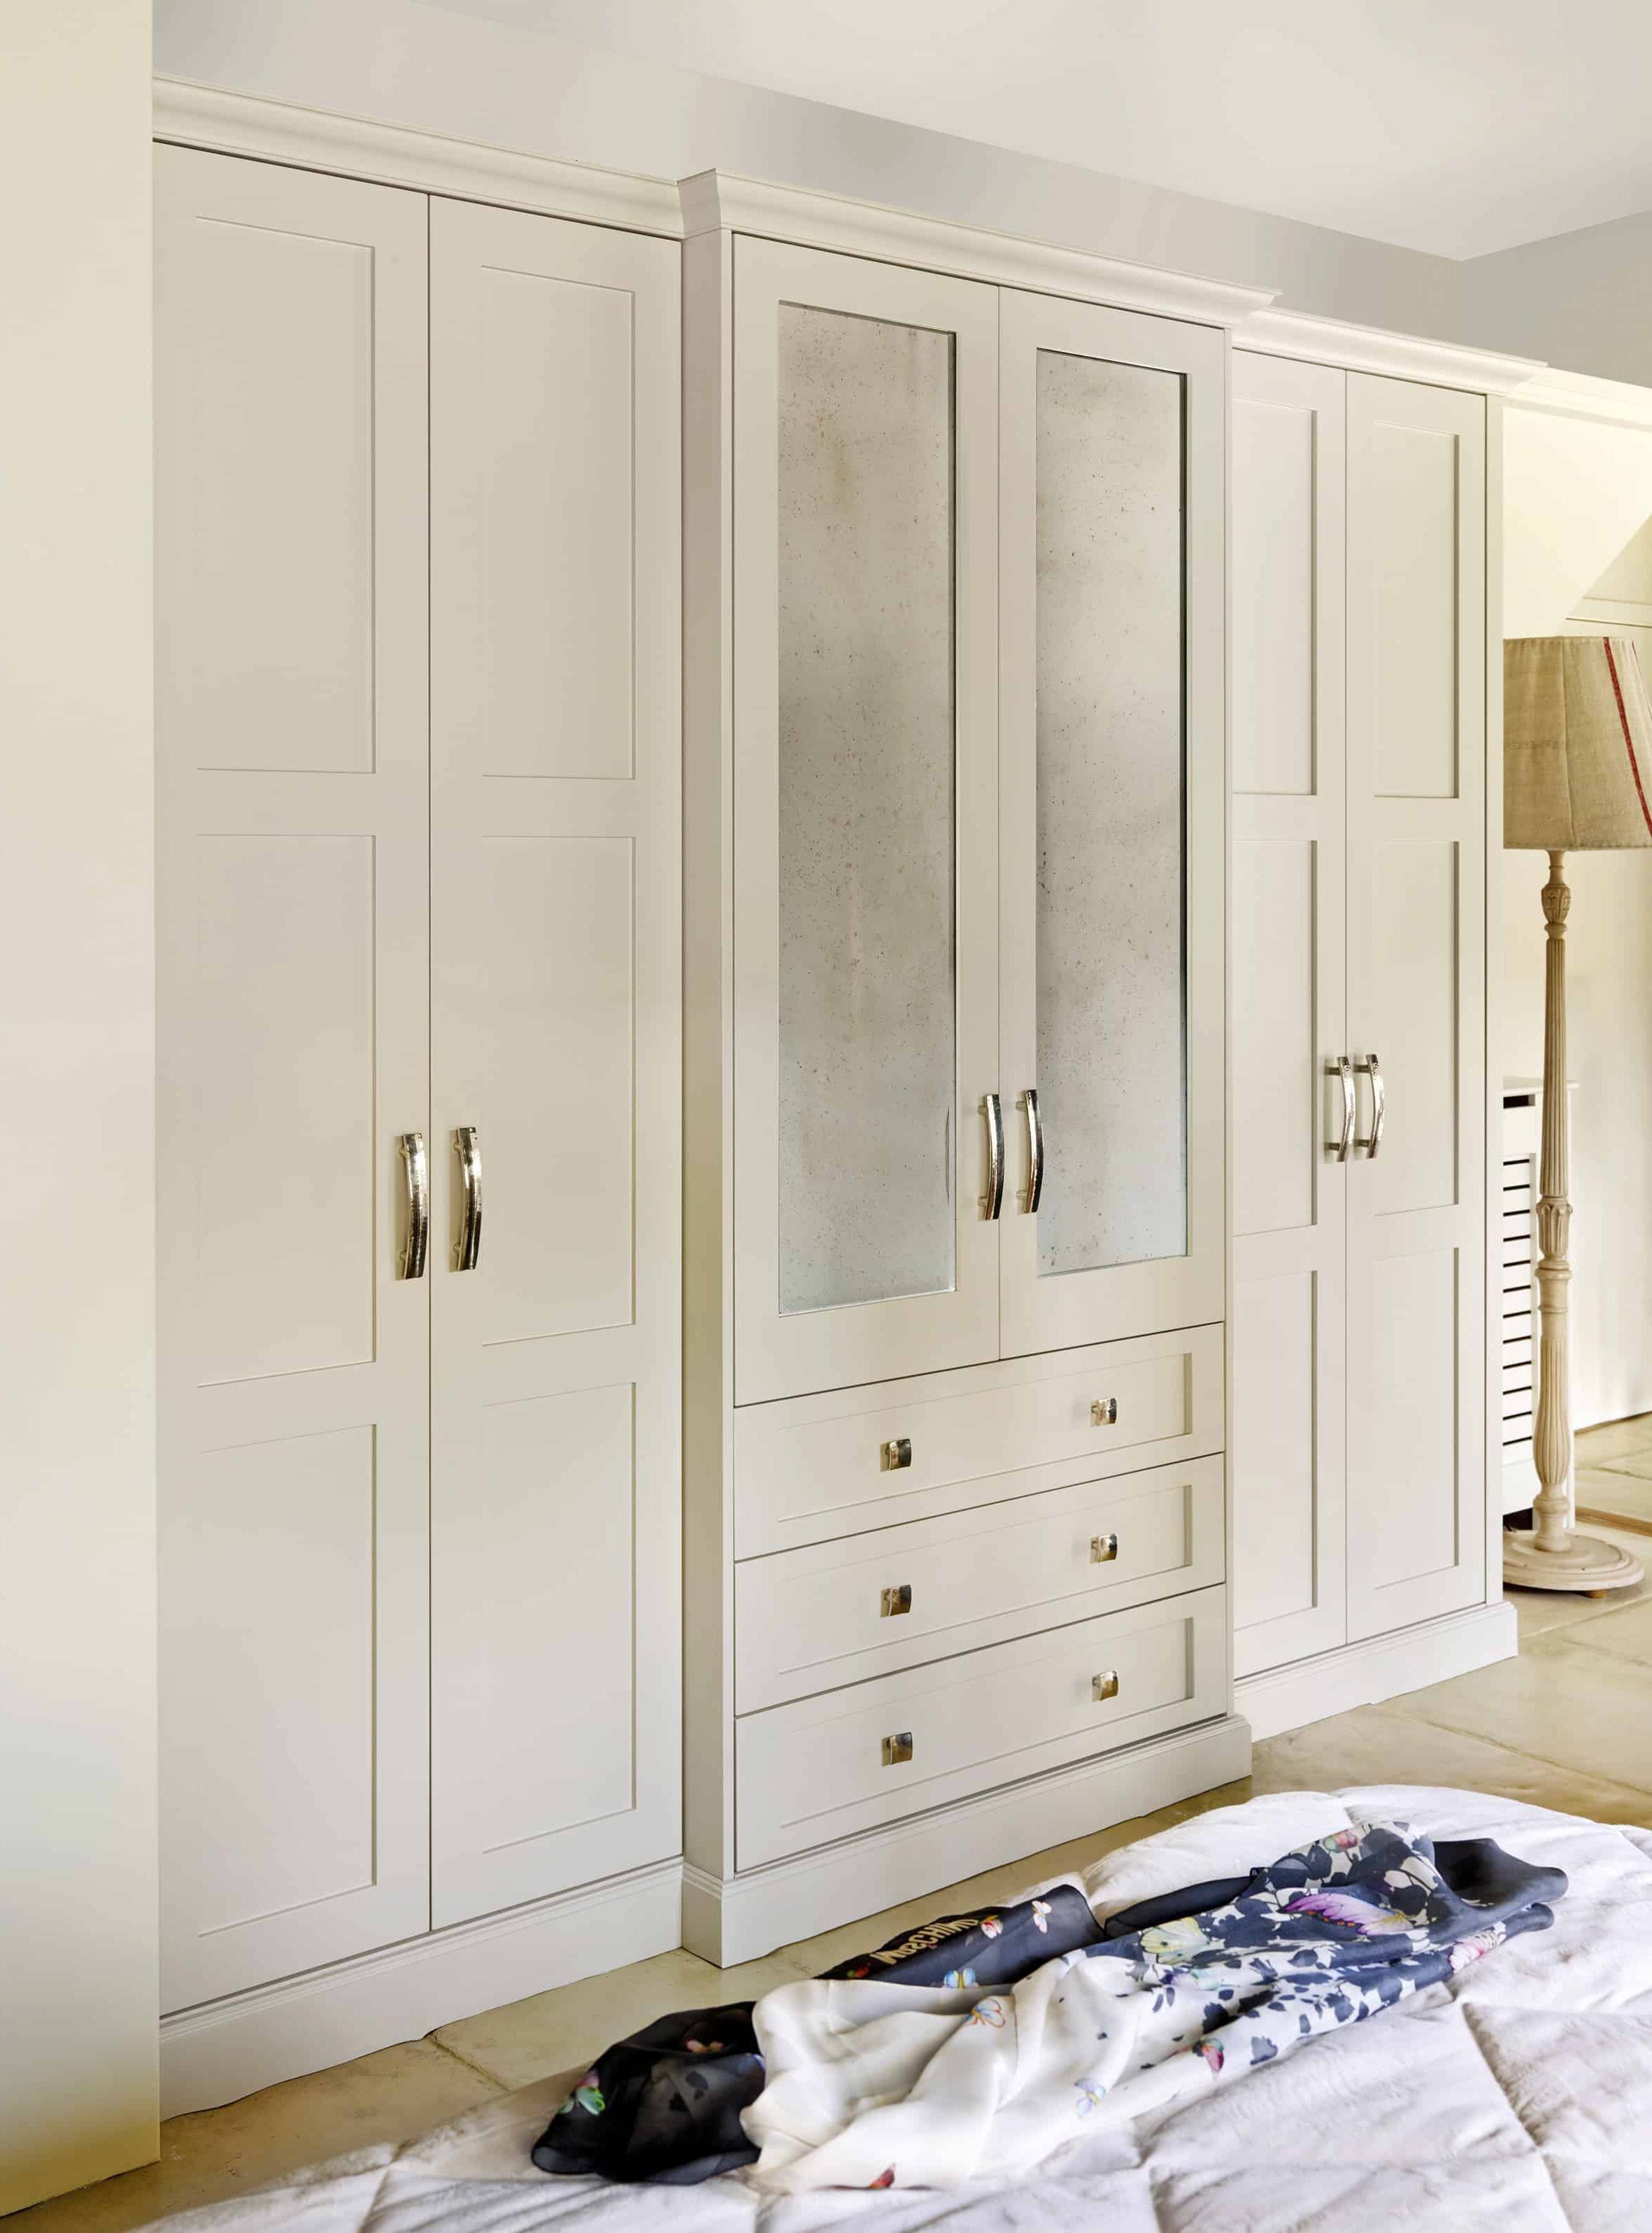 Bespoke Shaker Style Wardrobes | John Lewis Of Hungerford Inside Traditional Wardrobes (Gallery 15 of 20)